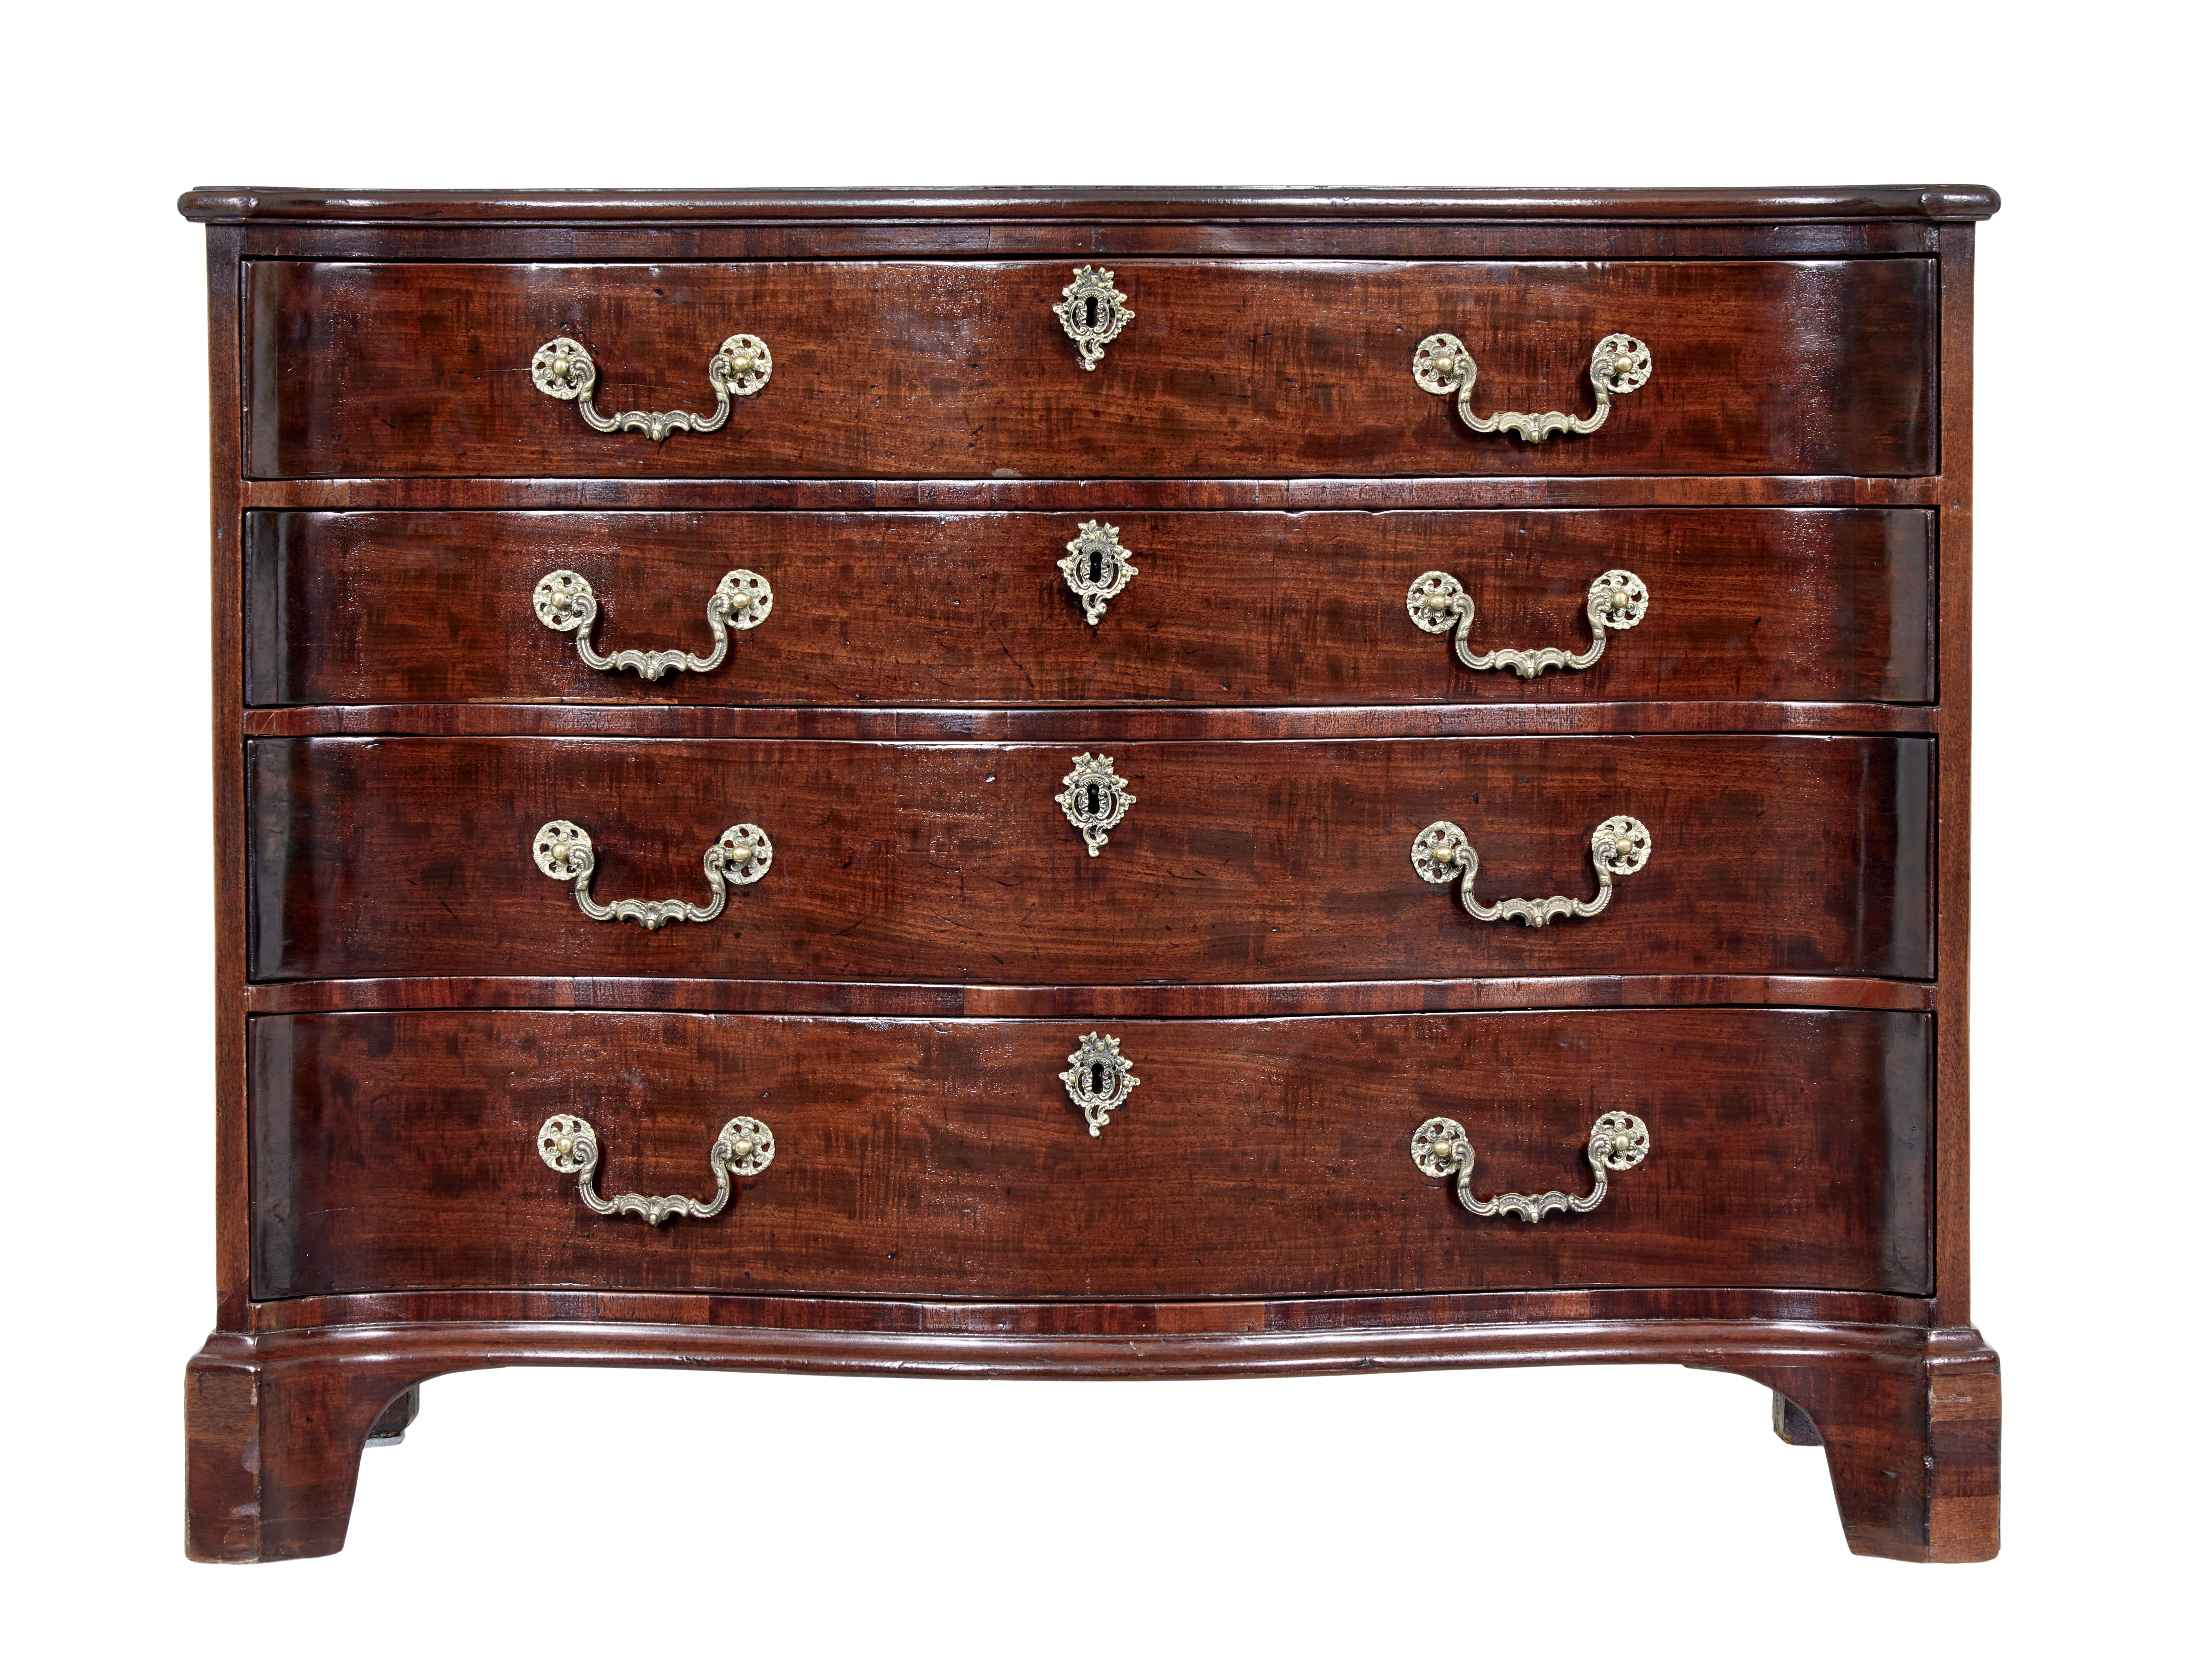 18th century George III mahogany serpentine chest of drawers, circa 1760.

Fine quality serpentine shaped Georgian period chest of drawers complete with brushing slide.

Top surface made from a single piece of timber.  Chest comprises of 4 long